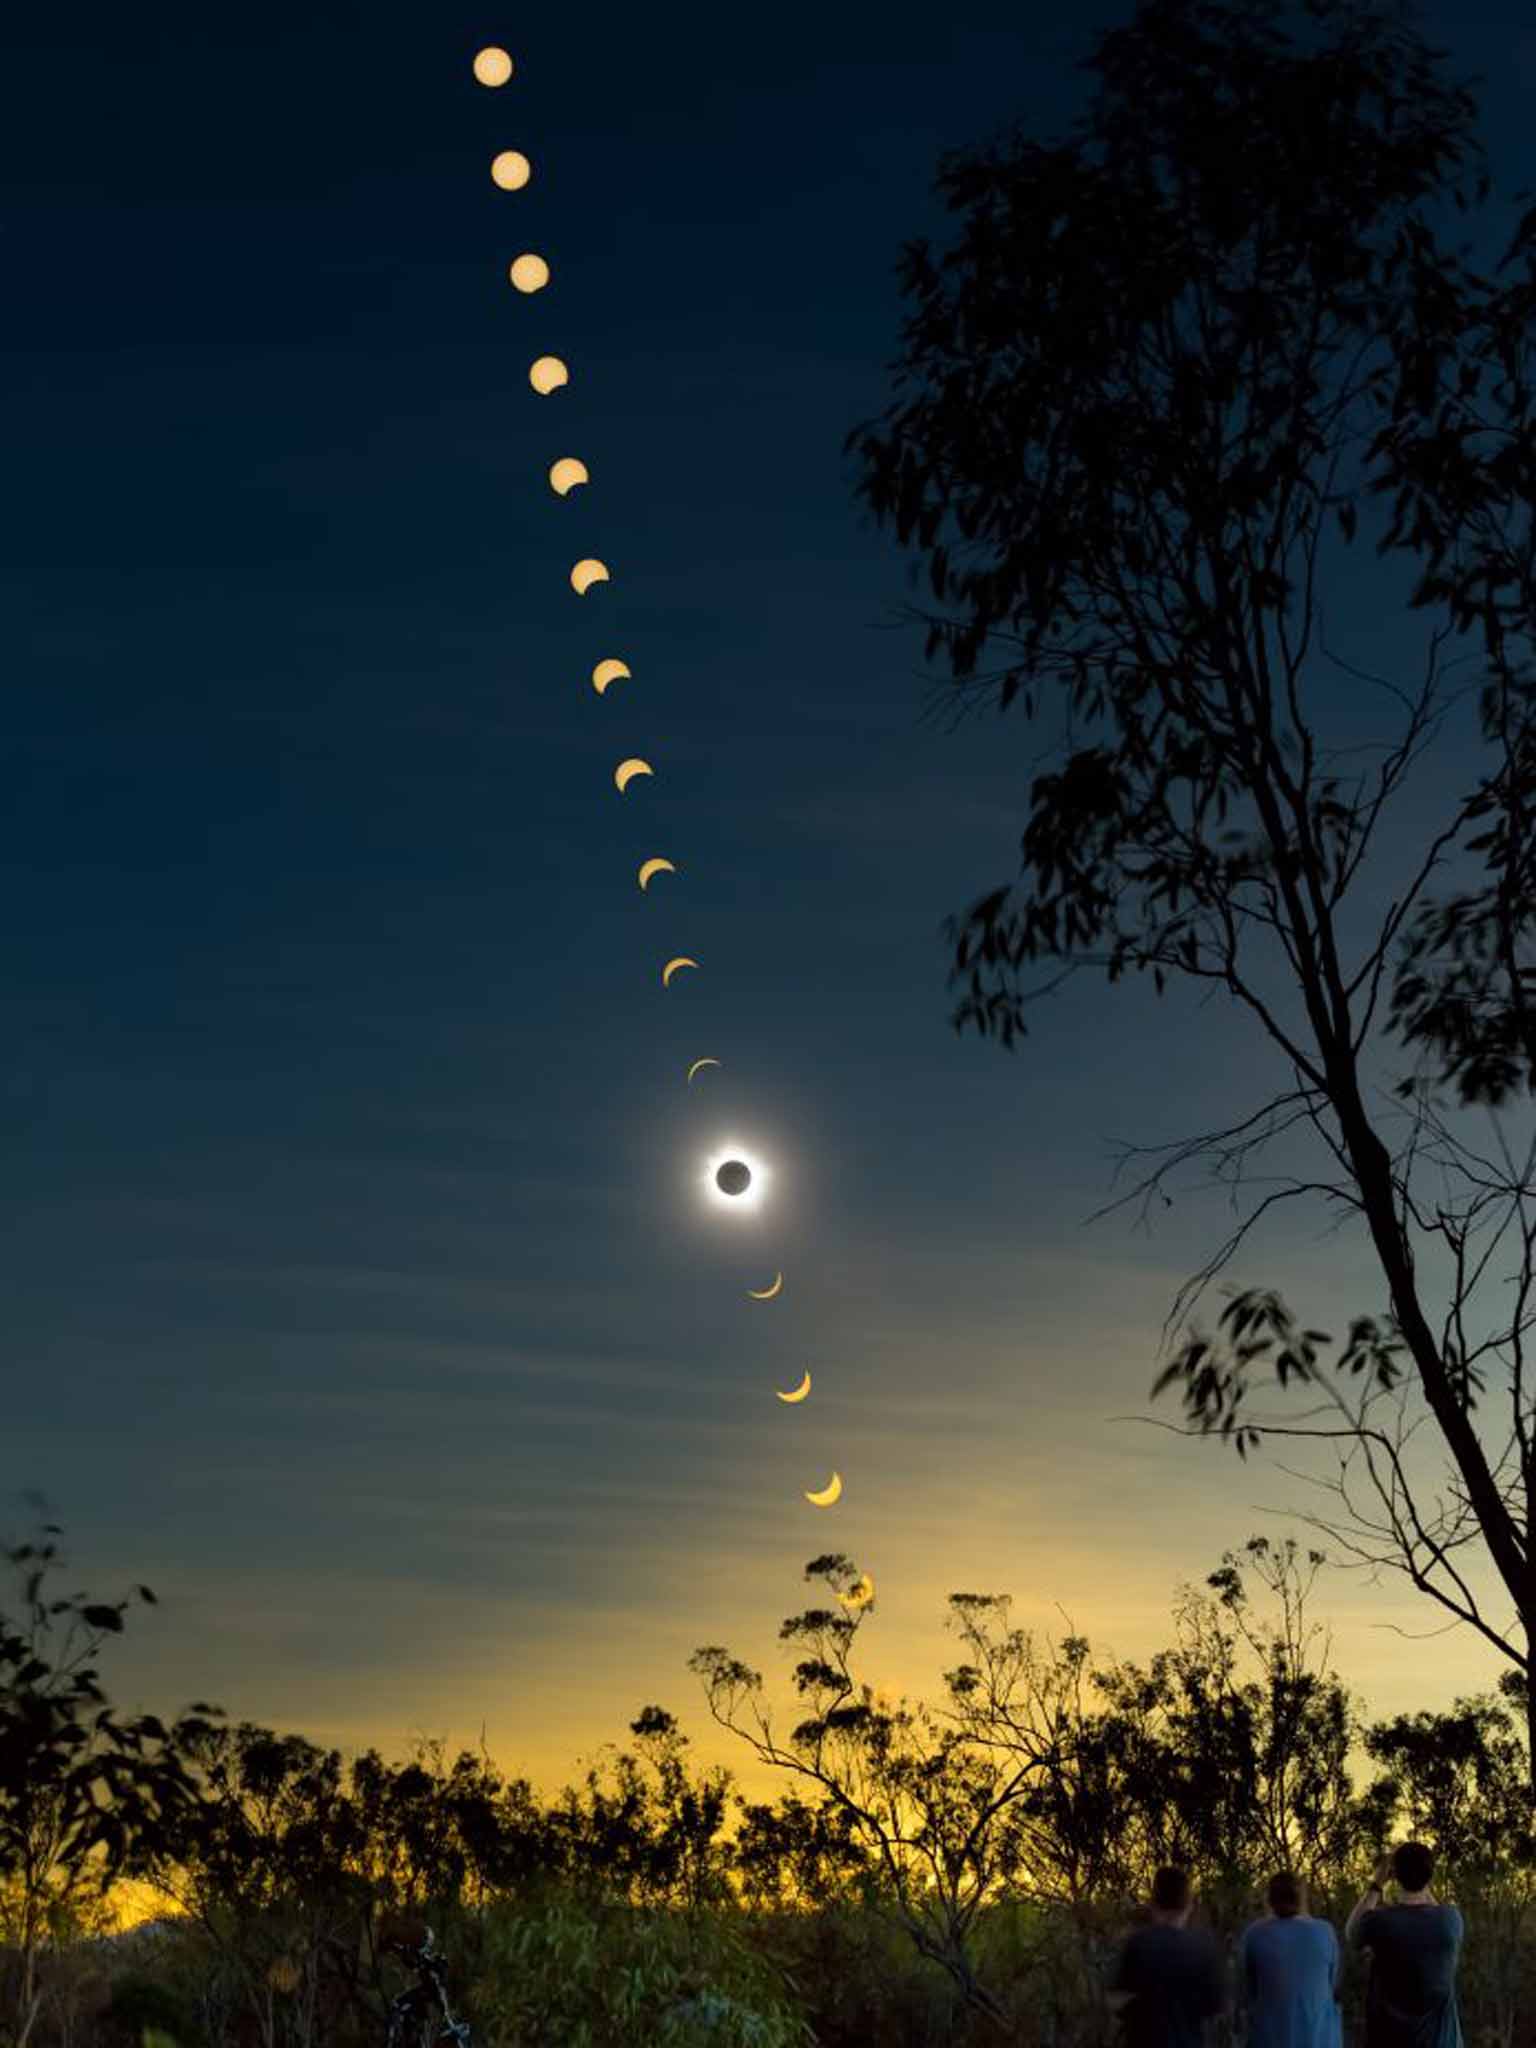 Tanzania will offer a dramatic viewpoint for next year's annular eclipse